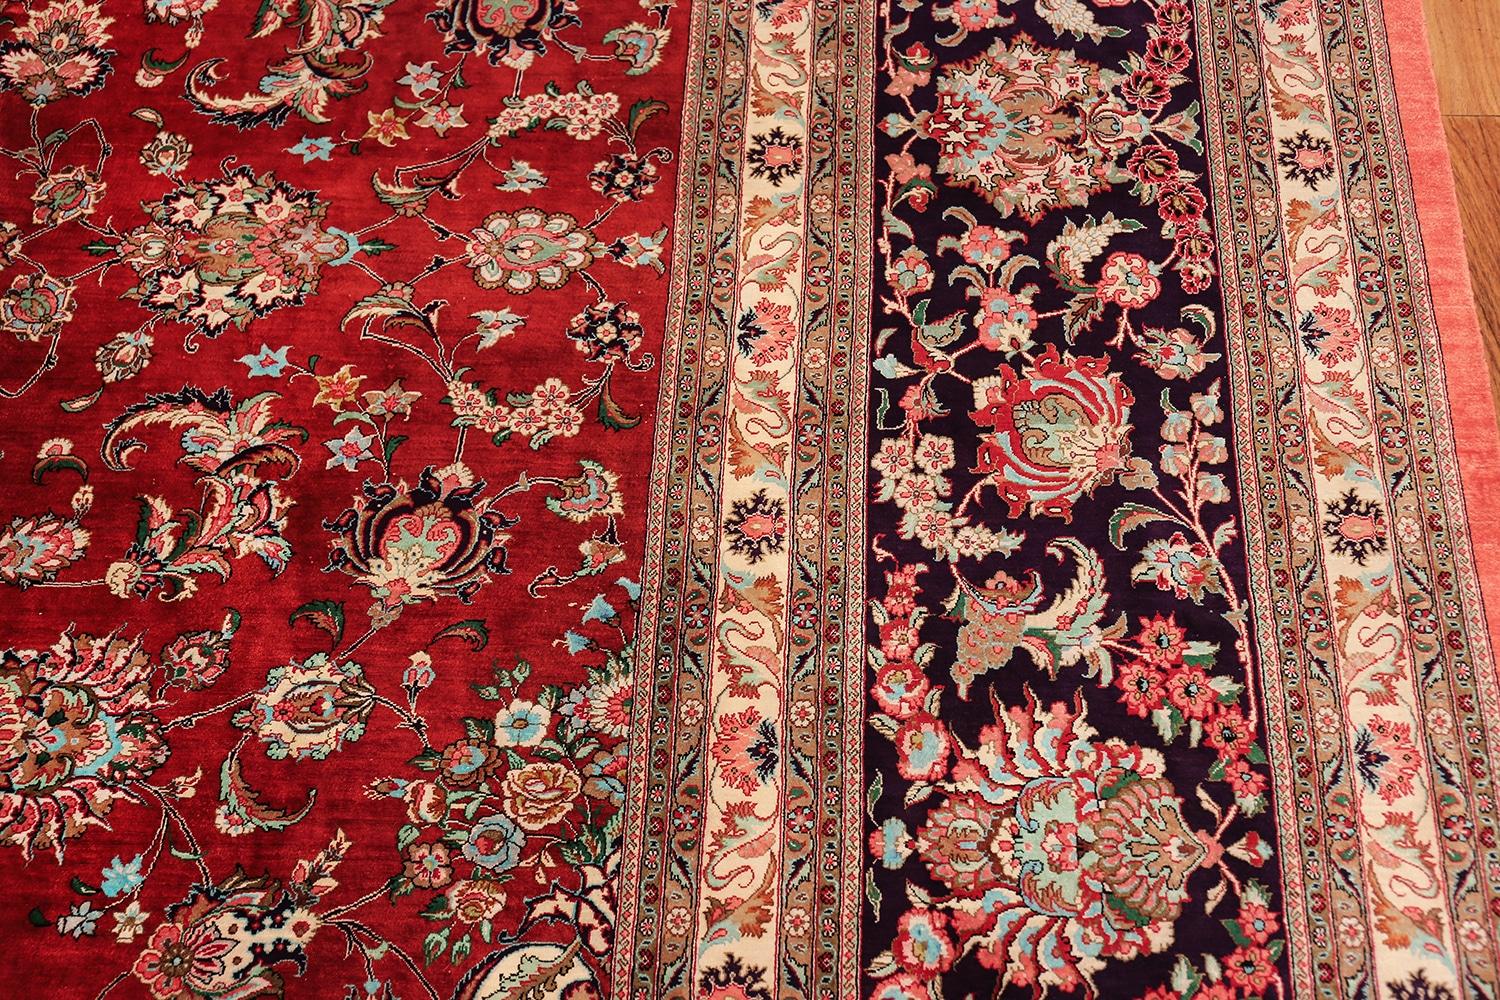 Breathtaking and exciting large floral vintage Persian silk Qum rug, country of origin / rug type: vintage Persian rug, circa late 20th century. Size: 13 ft x 19 ft 9 in (3.96 m x 6.02 m).

